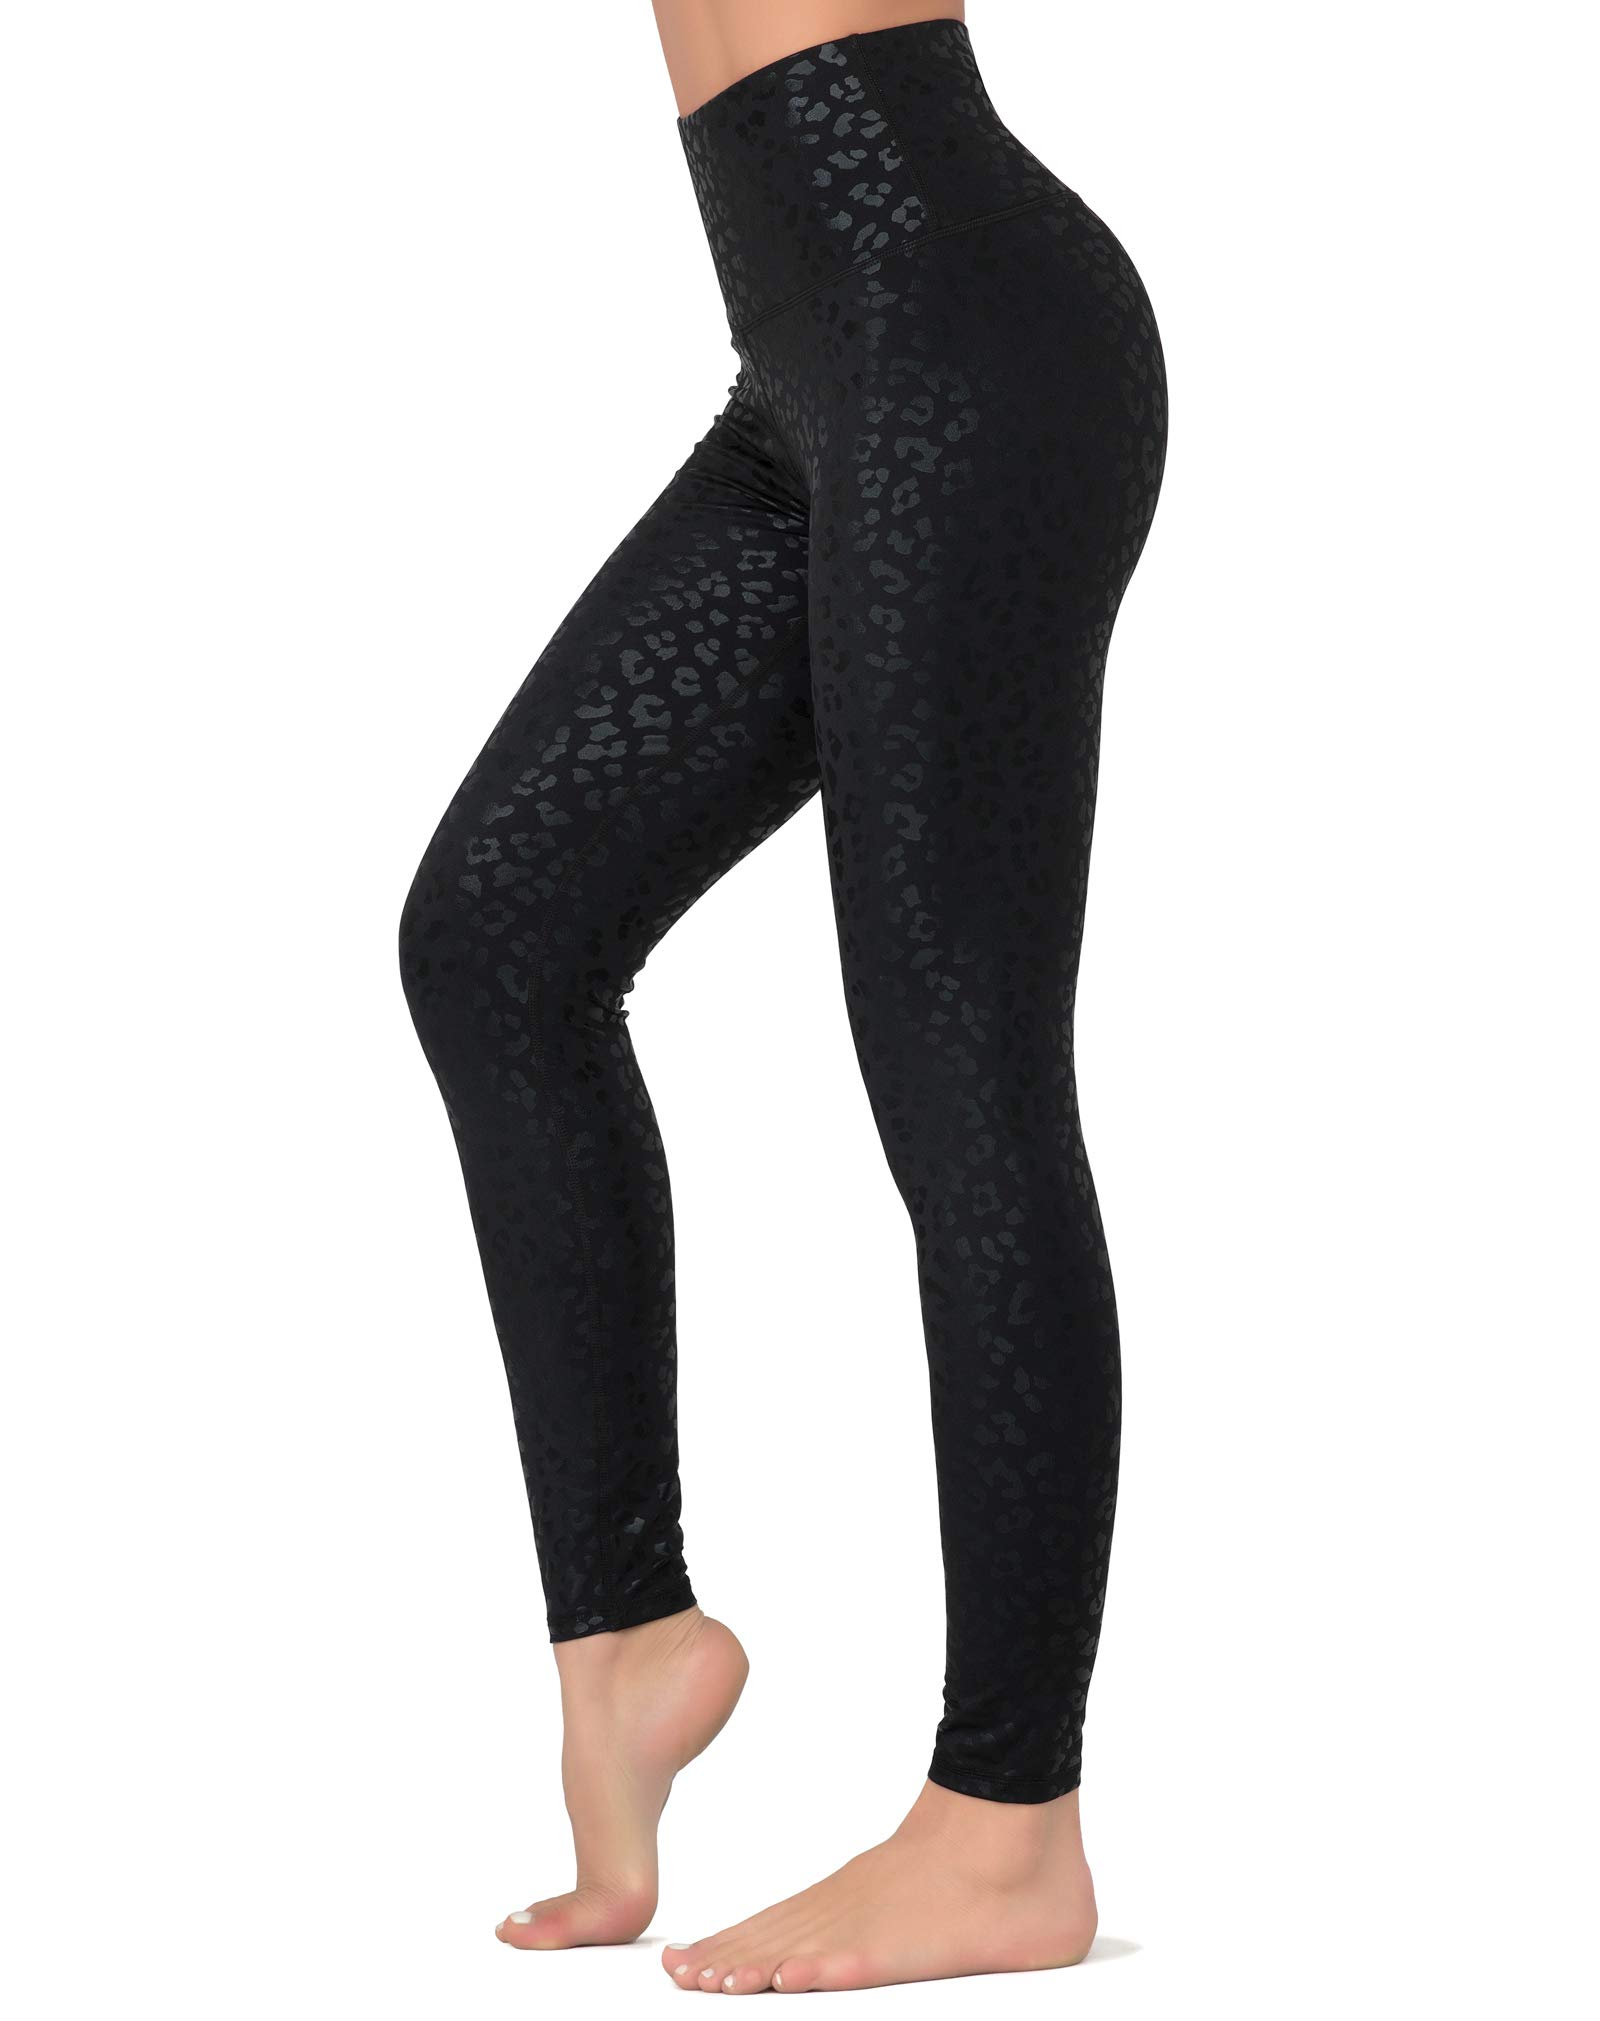 20 Best Compression Leggings & Tights for Women 2022